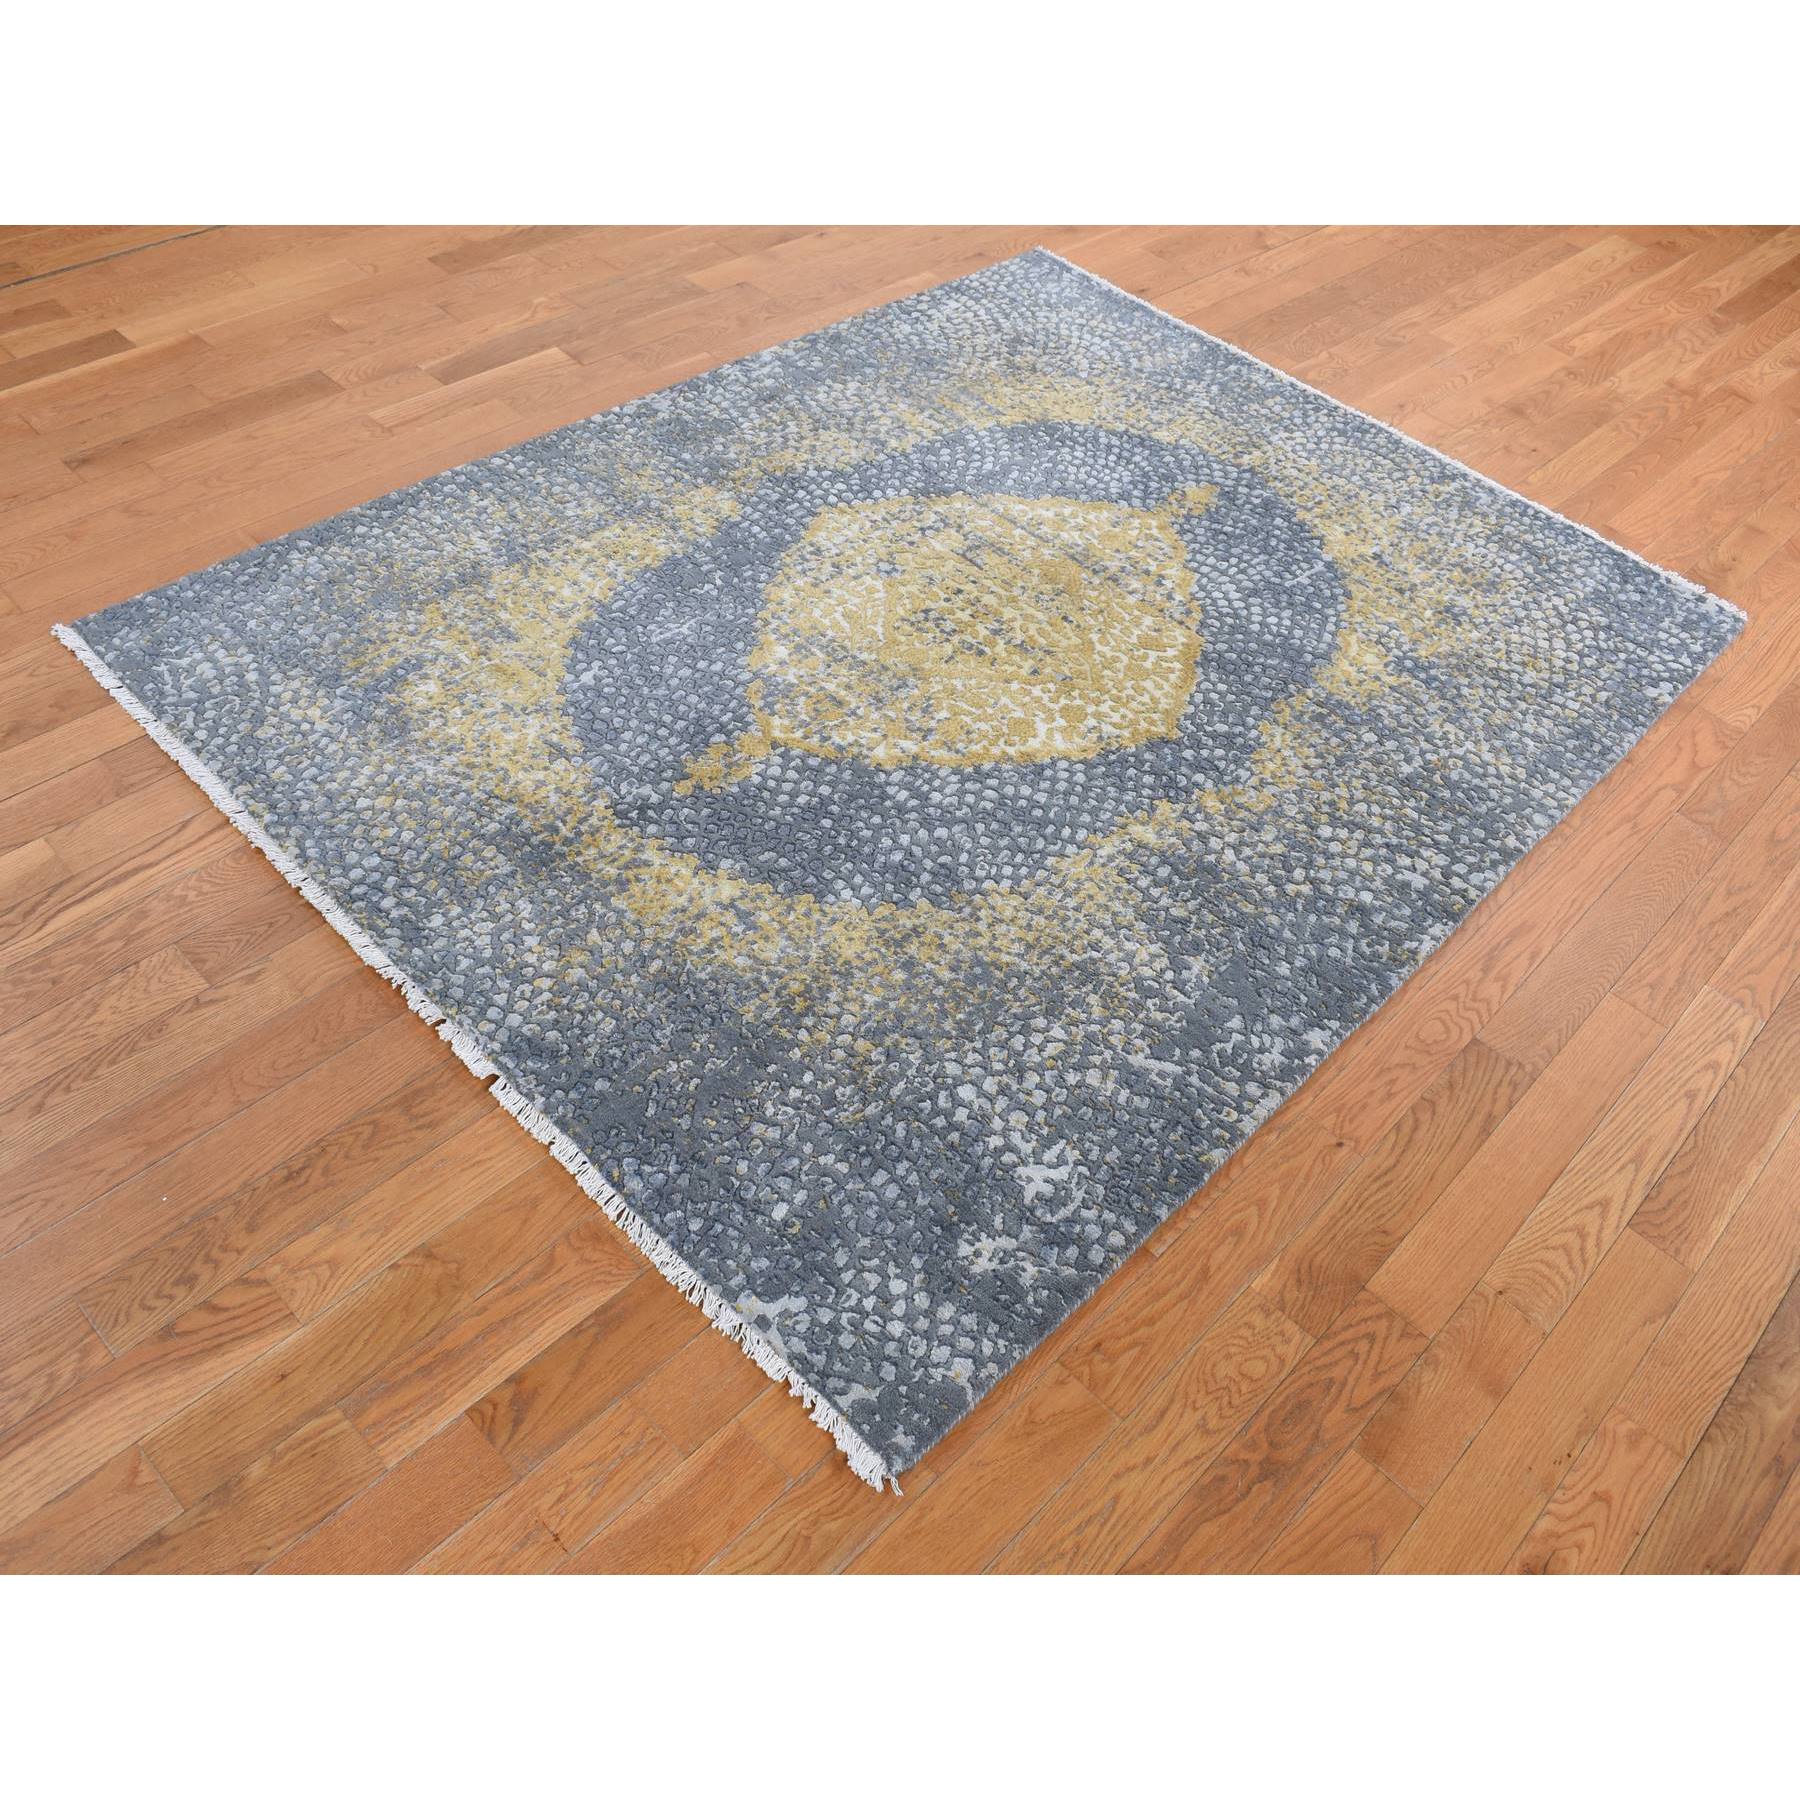 5'2"x7' Carbon Gray with Mix of Gold, Persian Medallion Design, Wool and Pure Silk, Hand Woven, Oriental Rug 